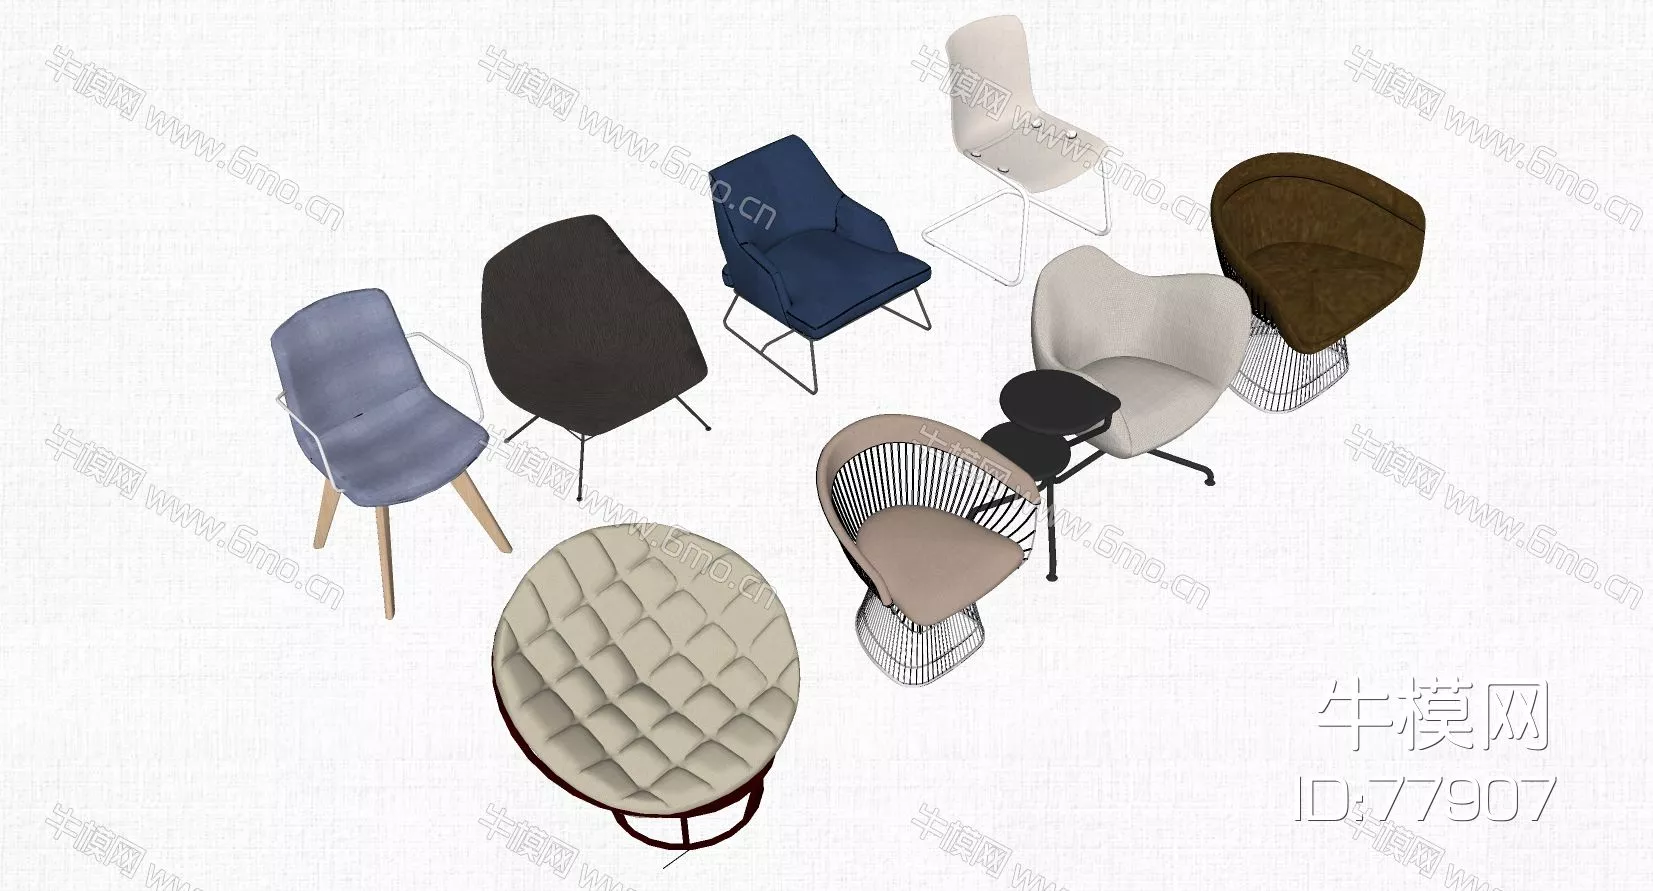 NORDIC LOUNGLE CHAIR - SKETCHUP 3D MODEL - VRAY - 77907